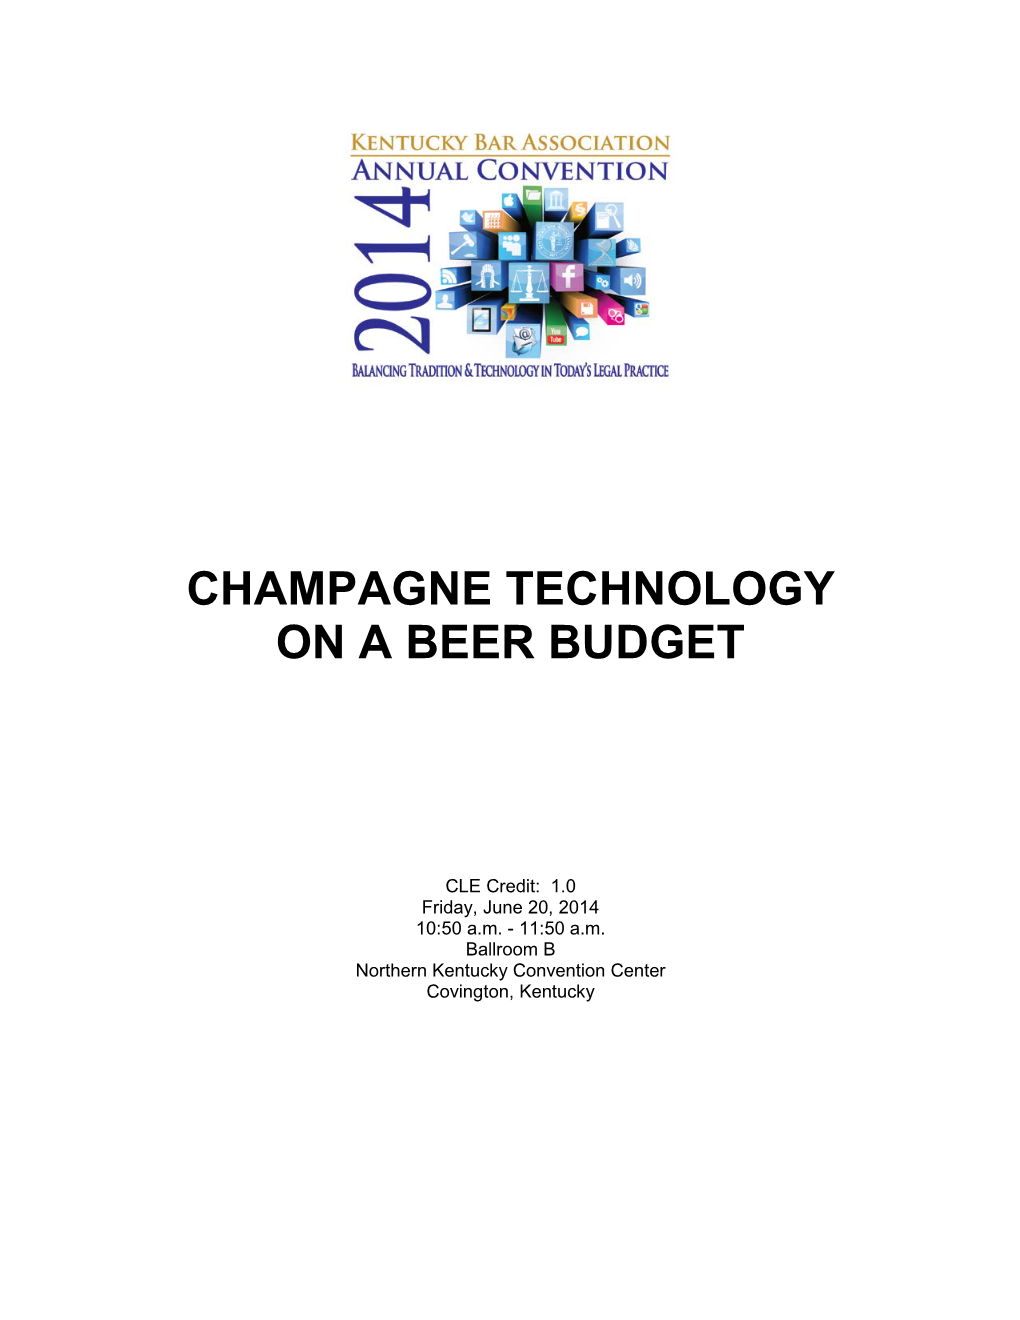 Champagne Technology on a Beer Budget